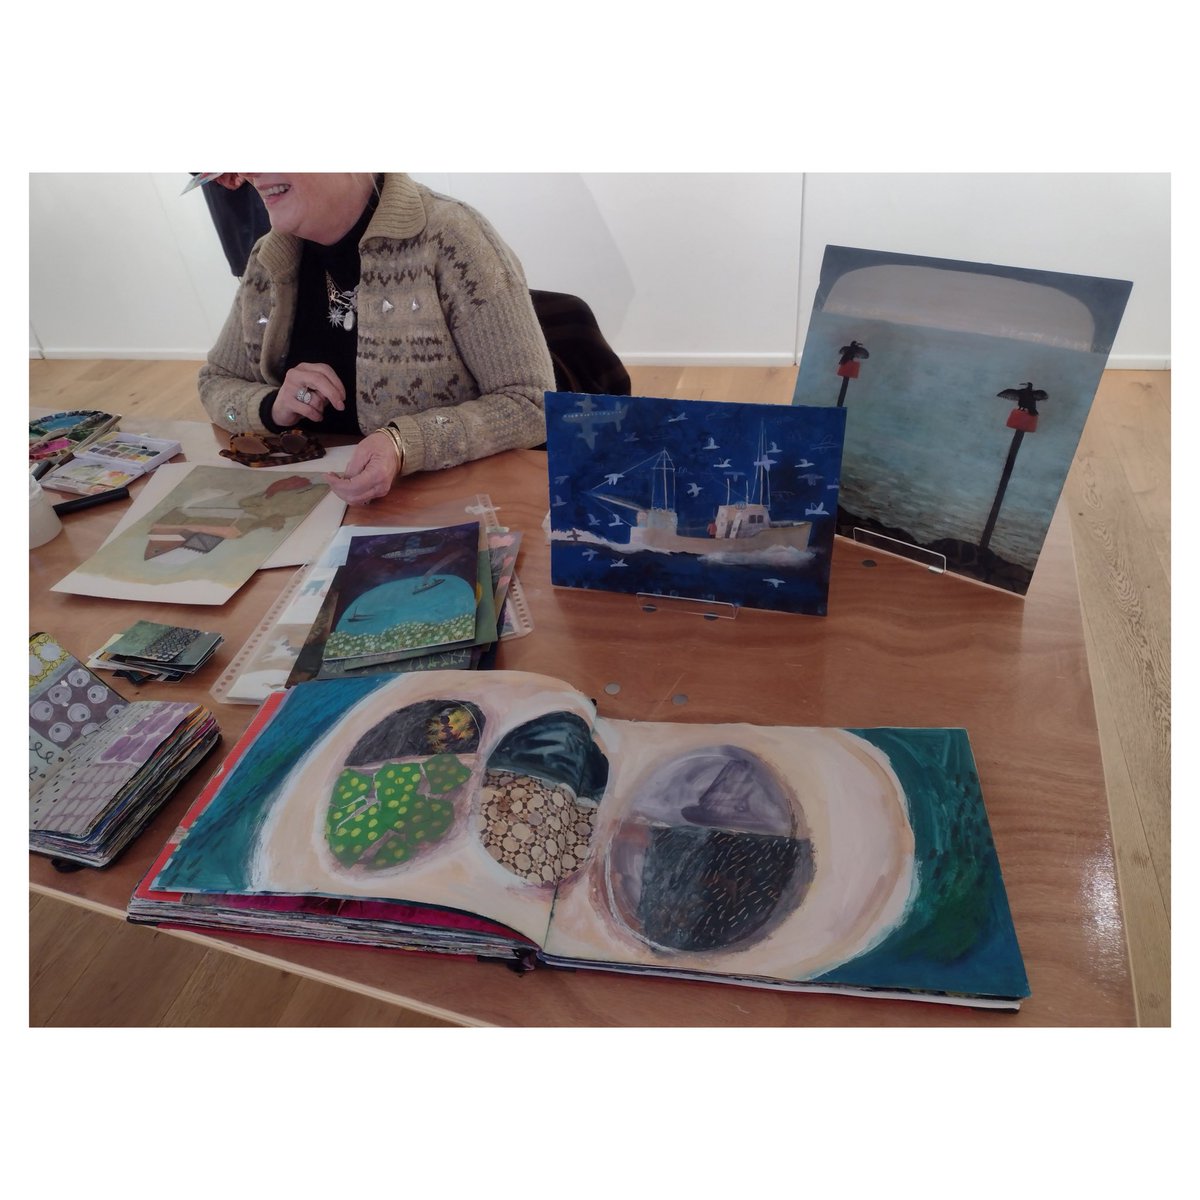 Don’t miss the chance to meet the artists behind the paintings in our Home exhibition at @banksidegallery! Artists will be showing their materials, sketchbooks and works in progress. ~ Free drop- in sessions will be happening every weekend during Home from 1-3pm! ~